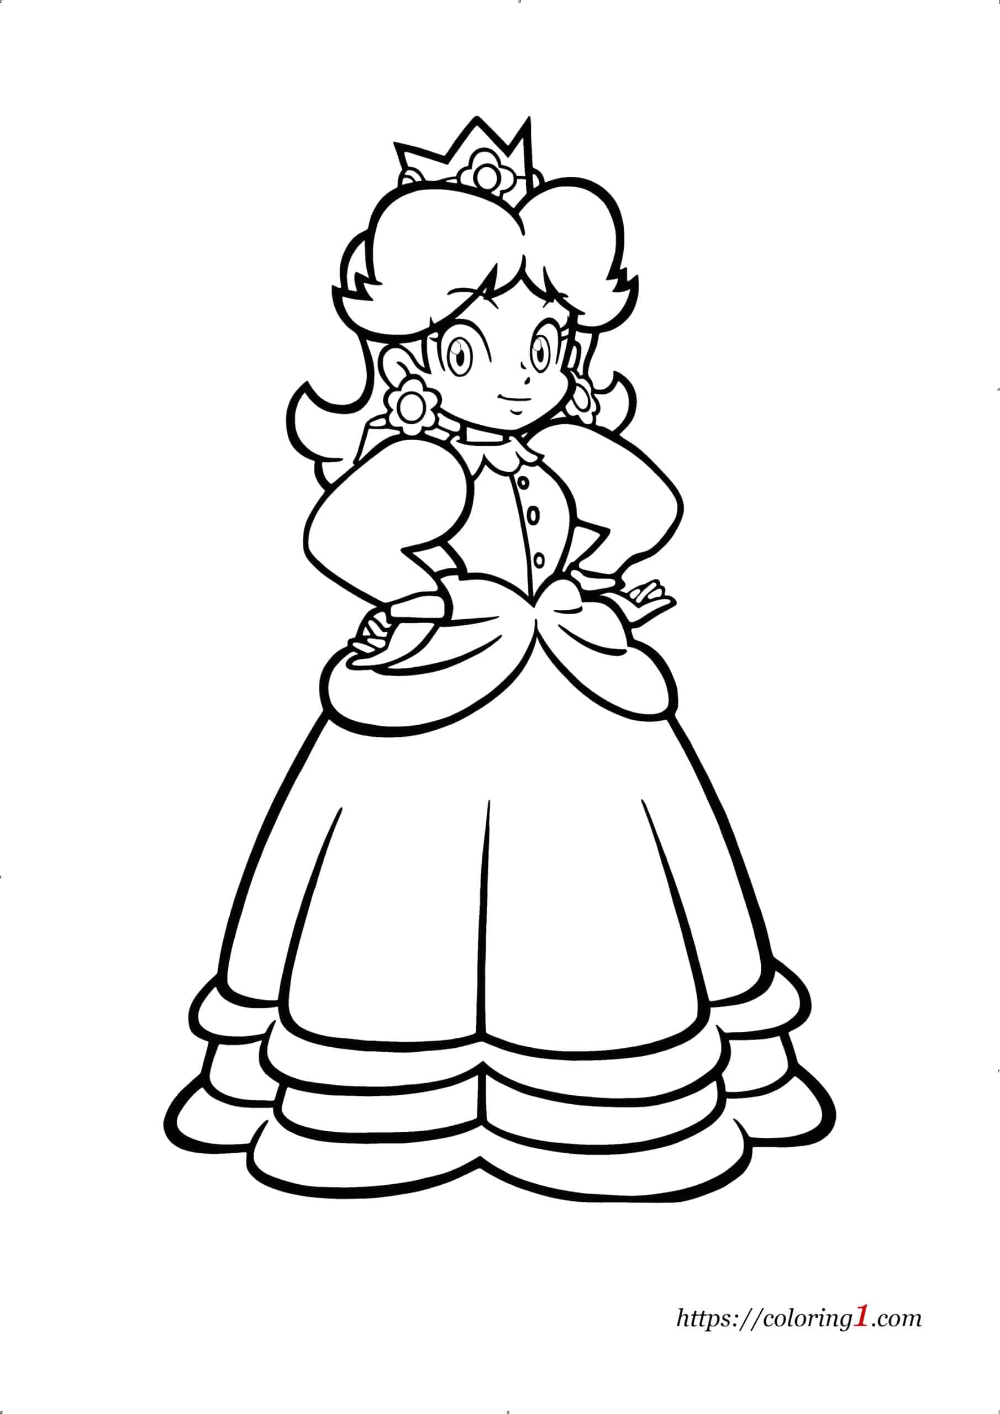 Princess daisy from super mario coloring pages